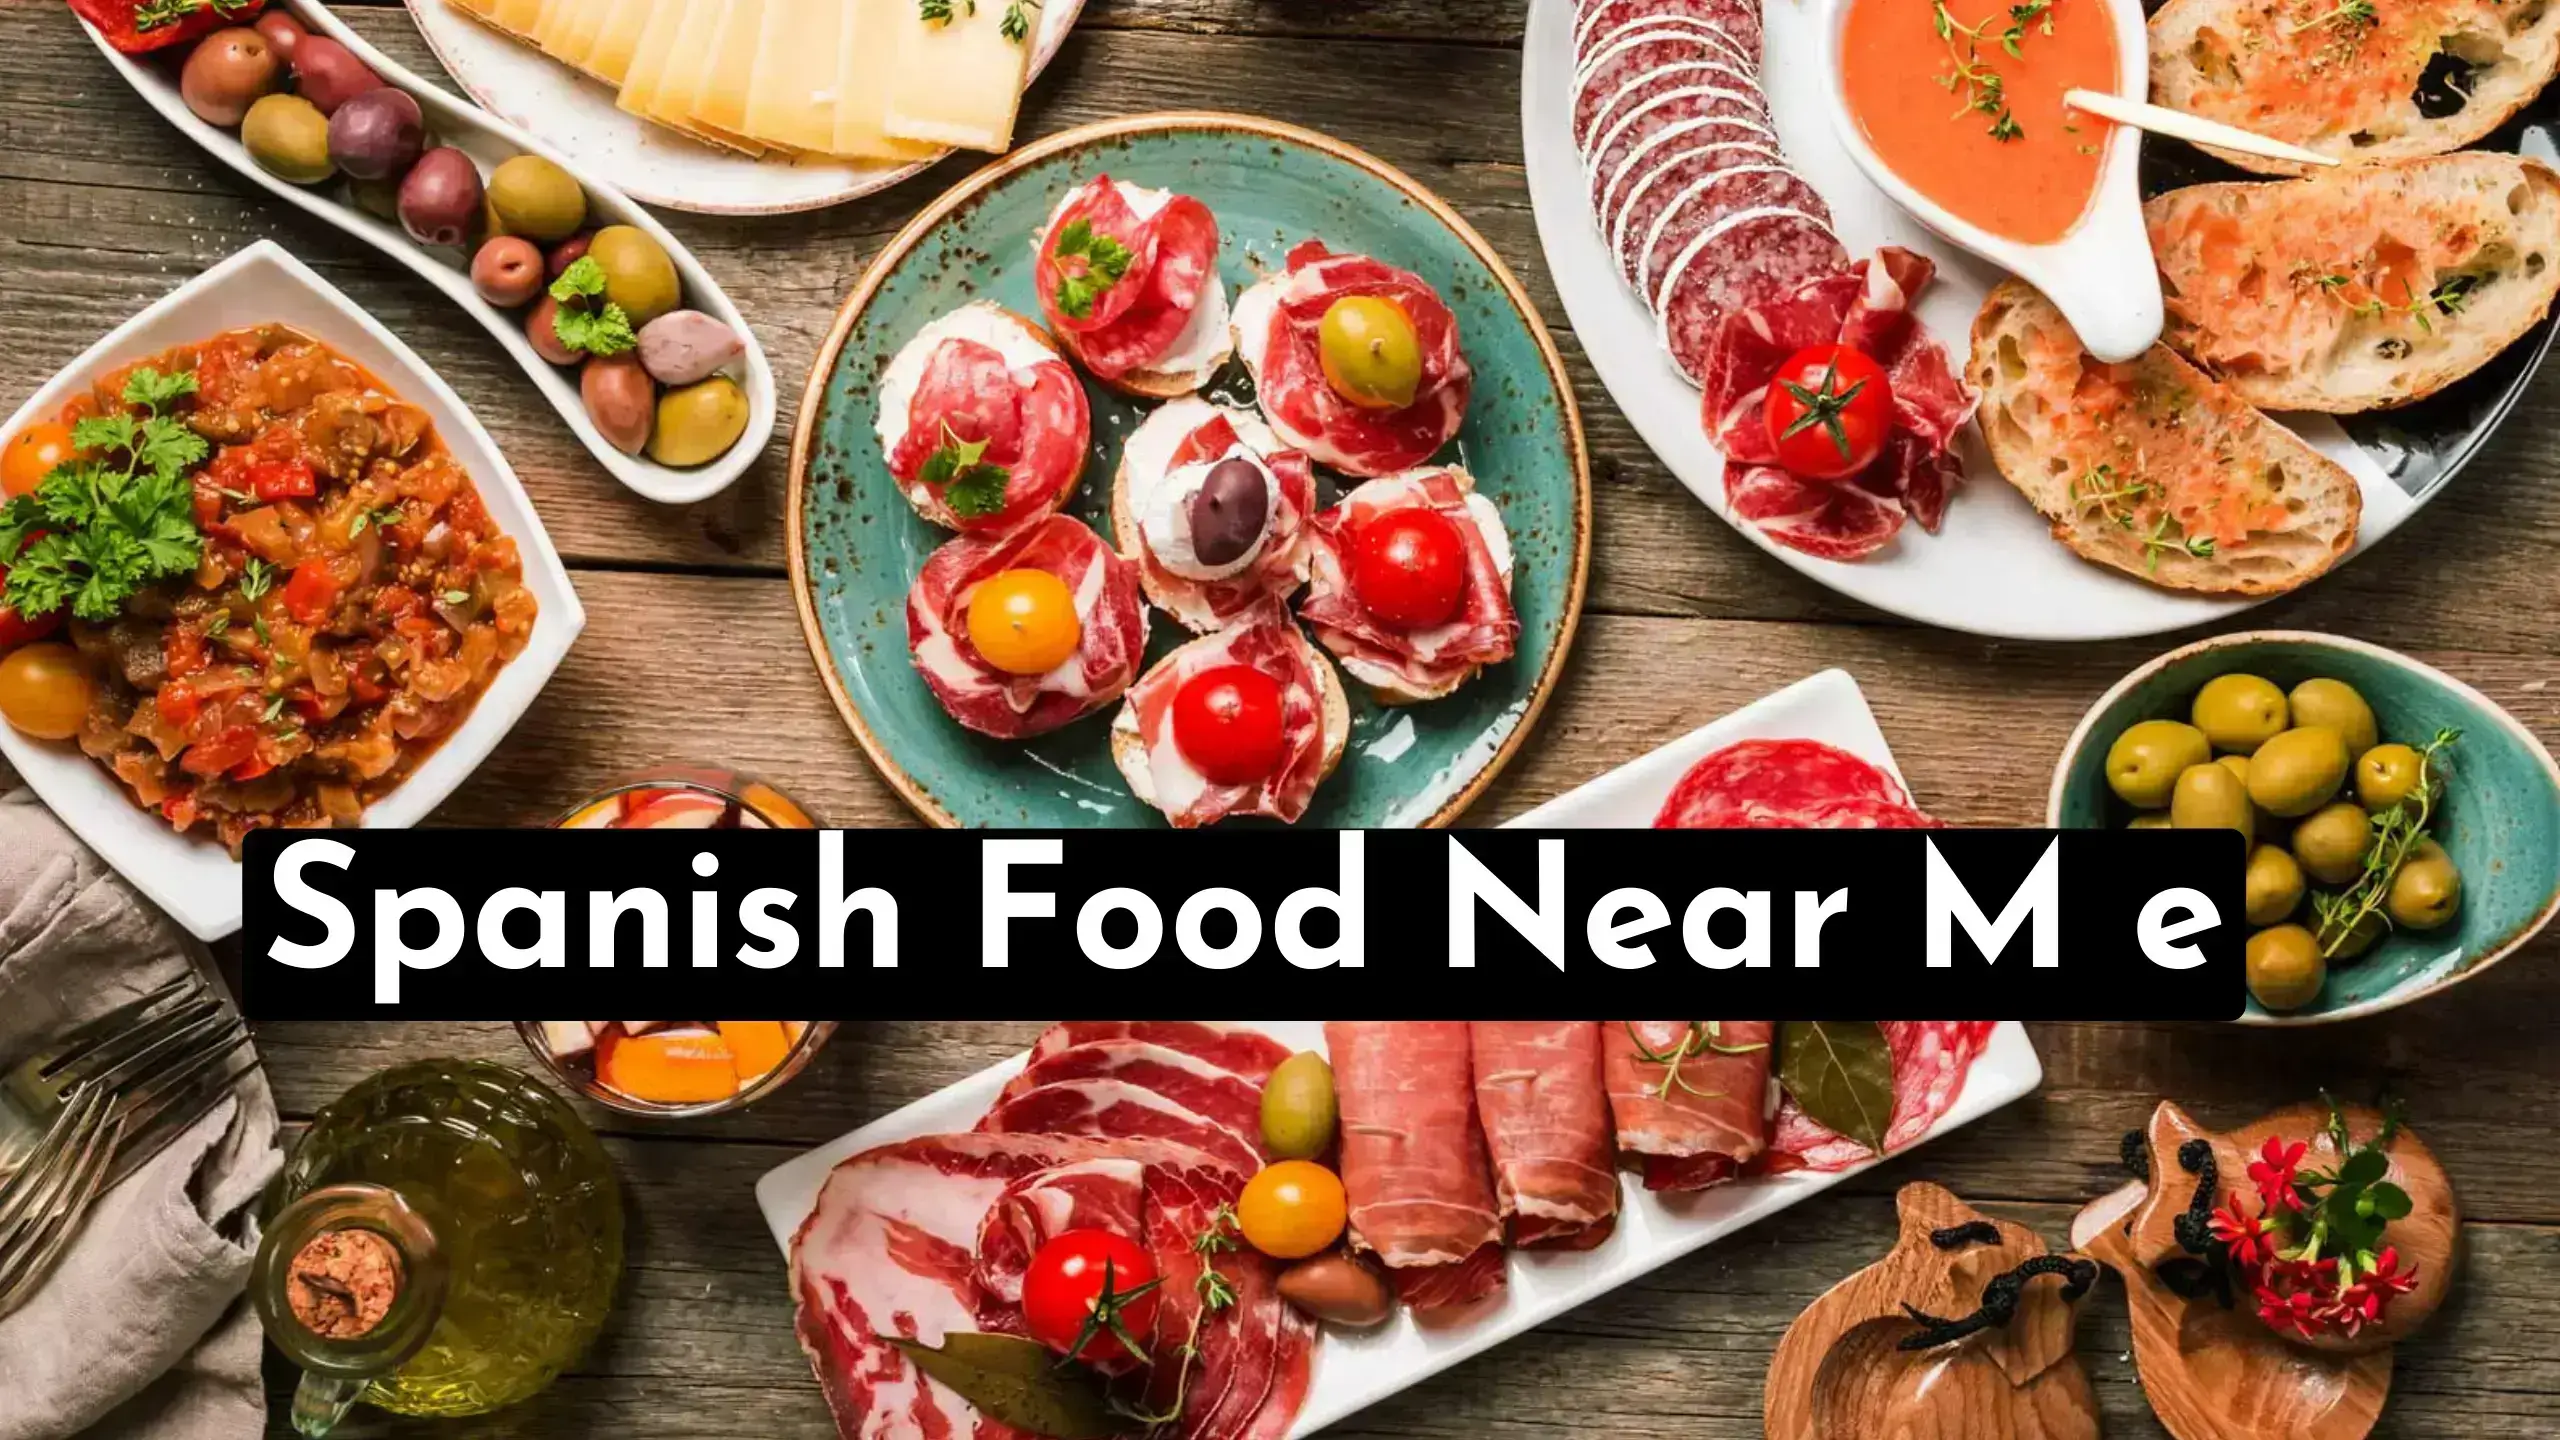 Spanish Food Near Me – Find The Cuisine Nearby